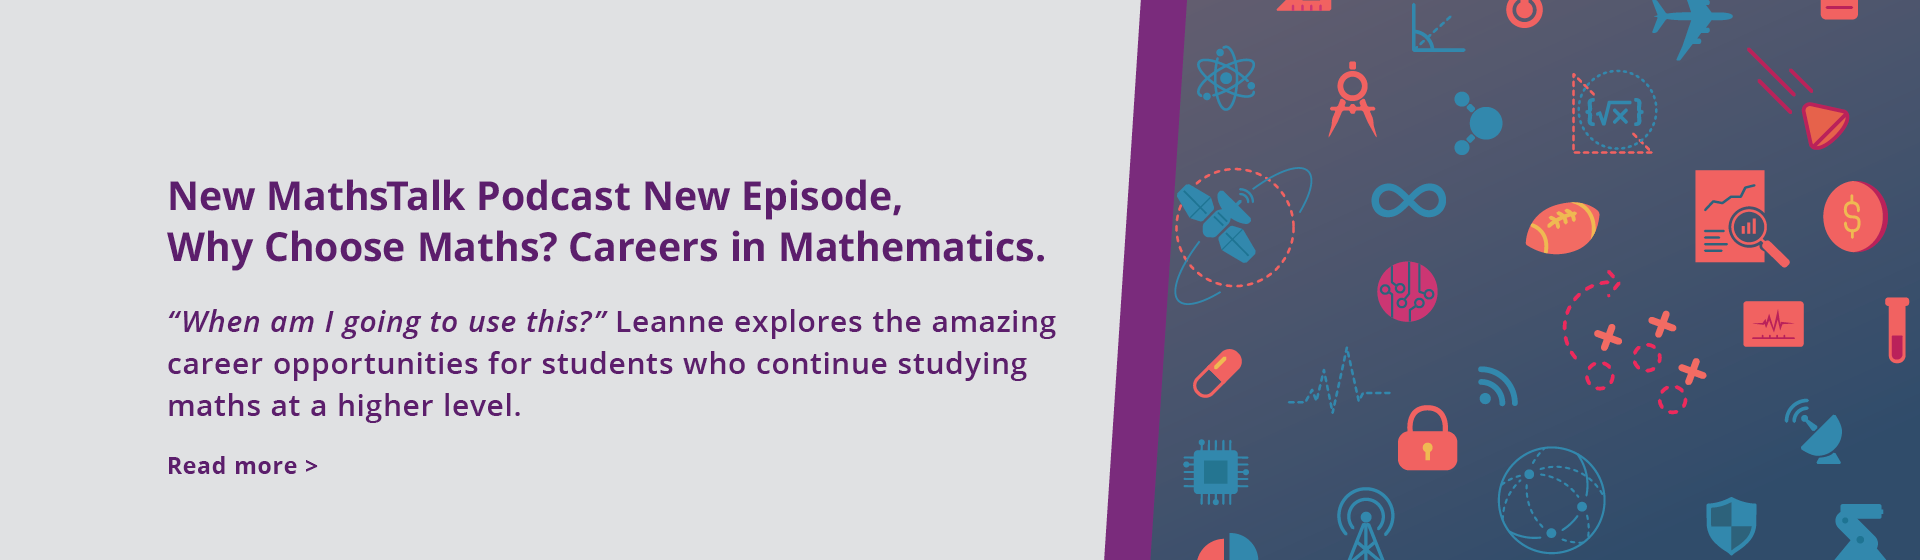 New episode of MathsTalk now available - Why Choose Maths? Careers in Mathematics.